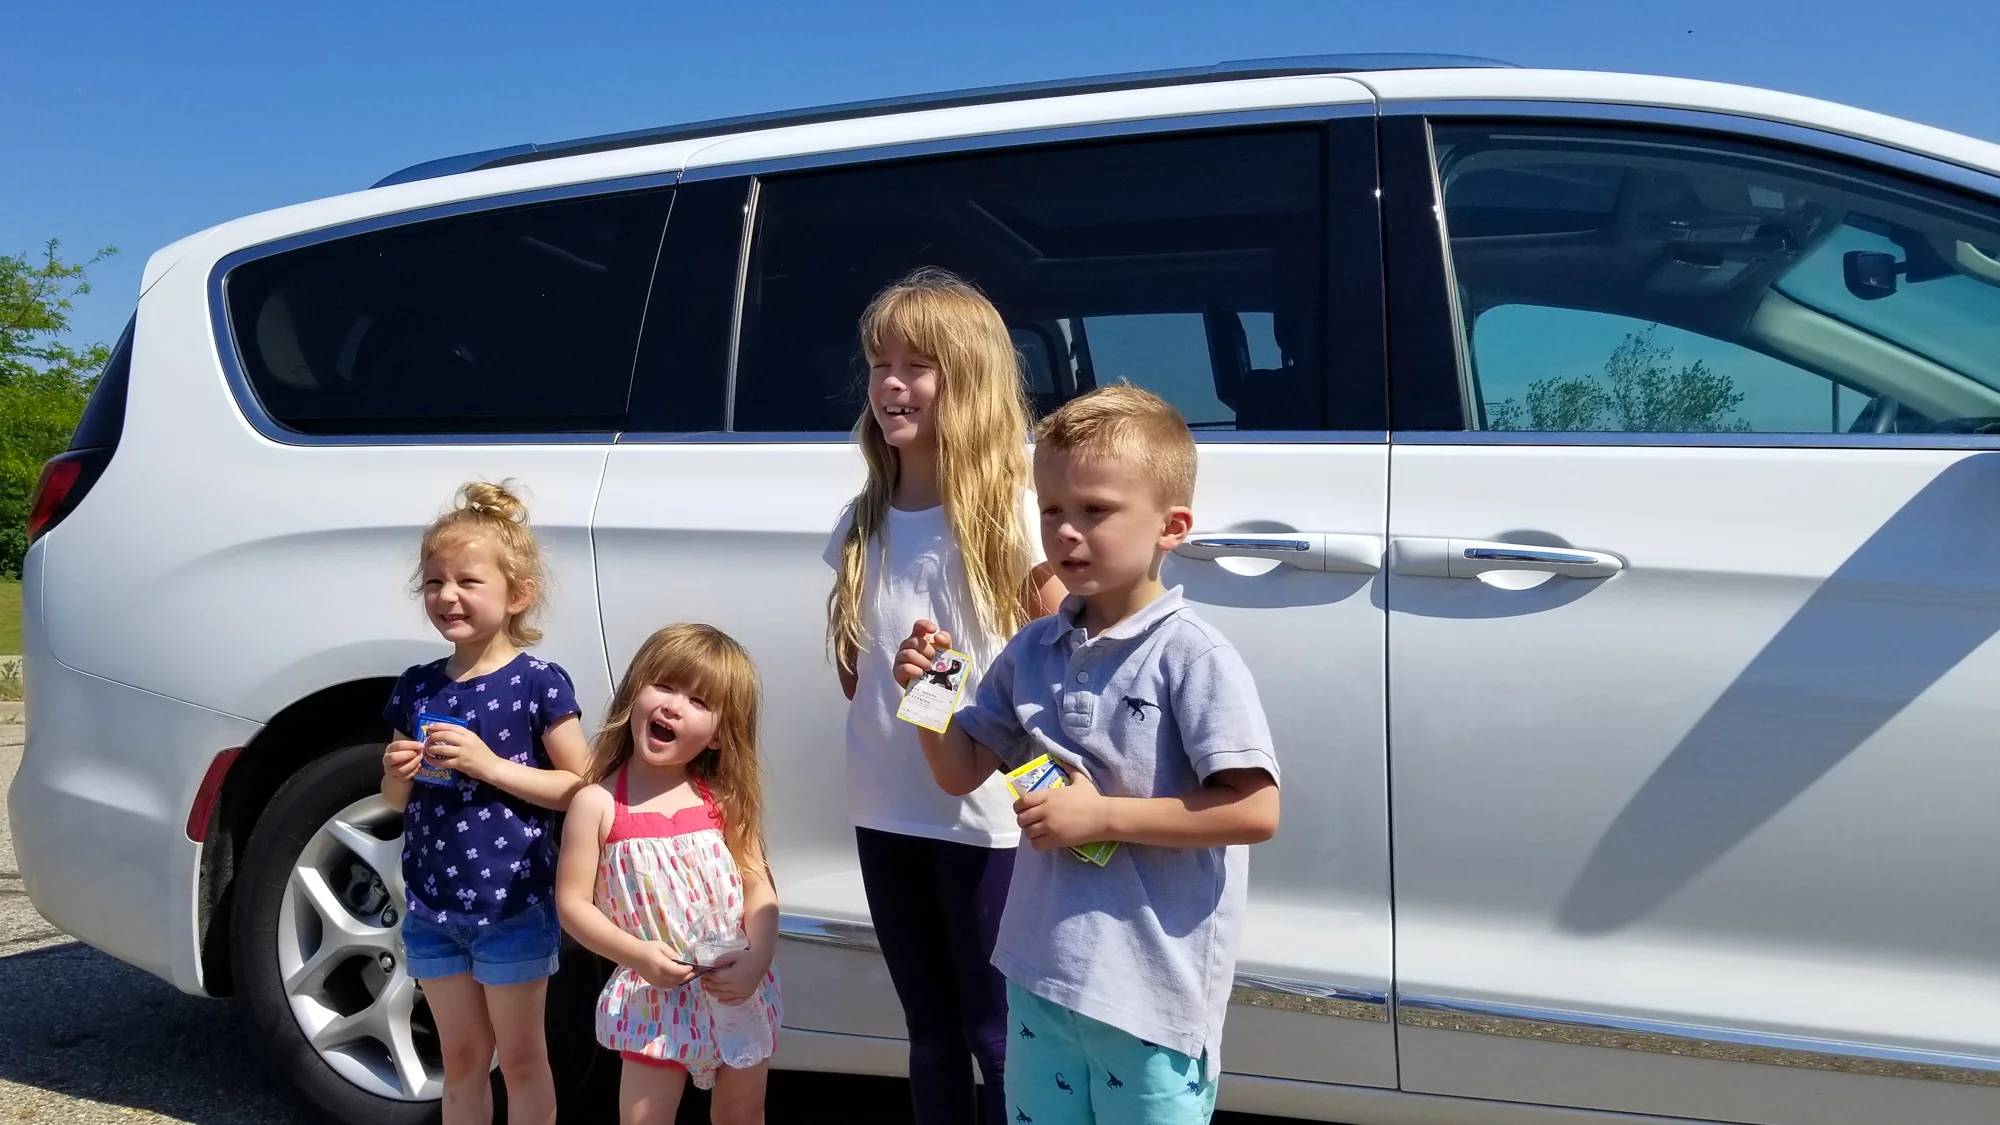 Traveling with kids in a car. Young kids in front of a white van on a roadtrip.